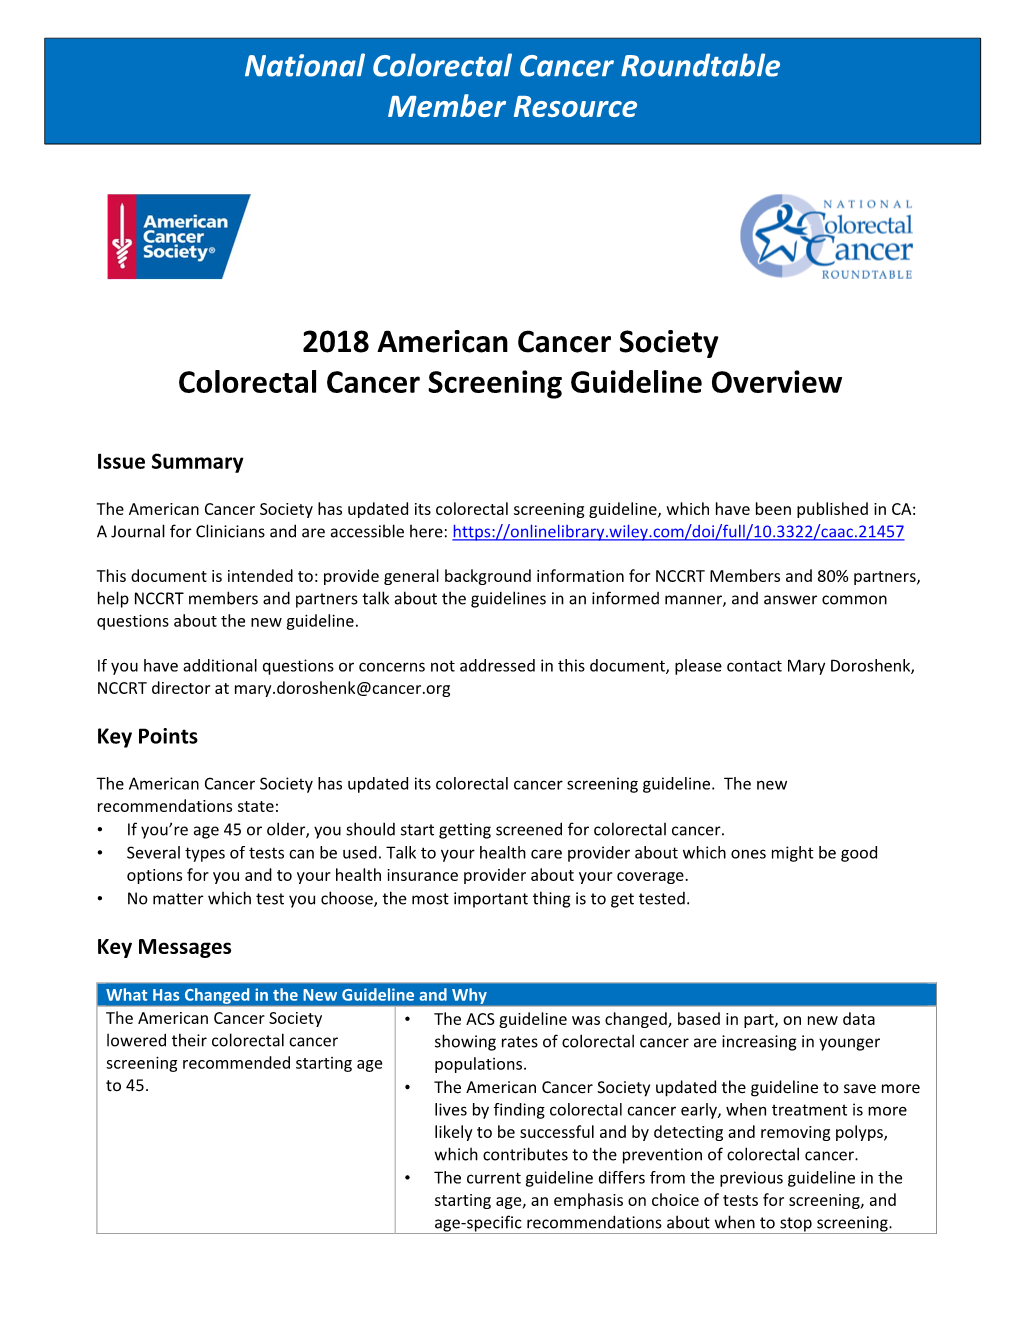 2018 American Cancer Society Colorectal Cancer Screening Guideline Overview